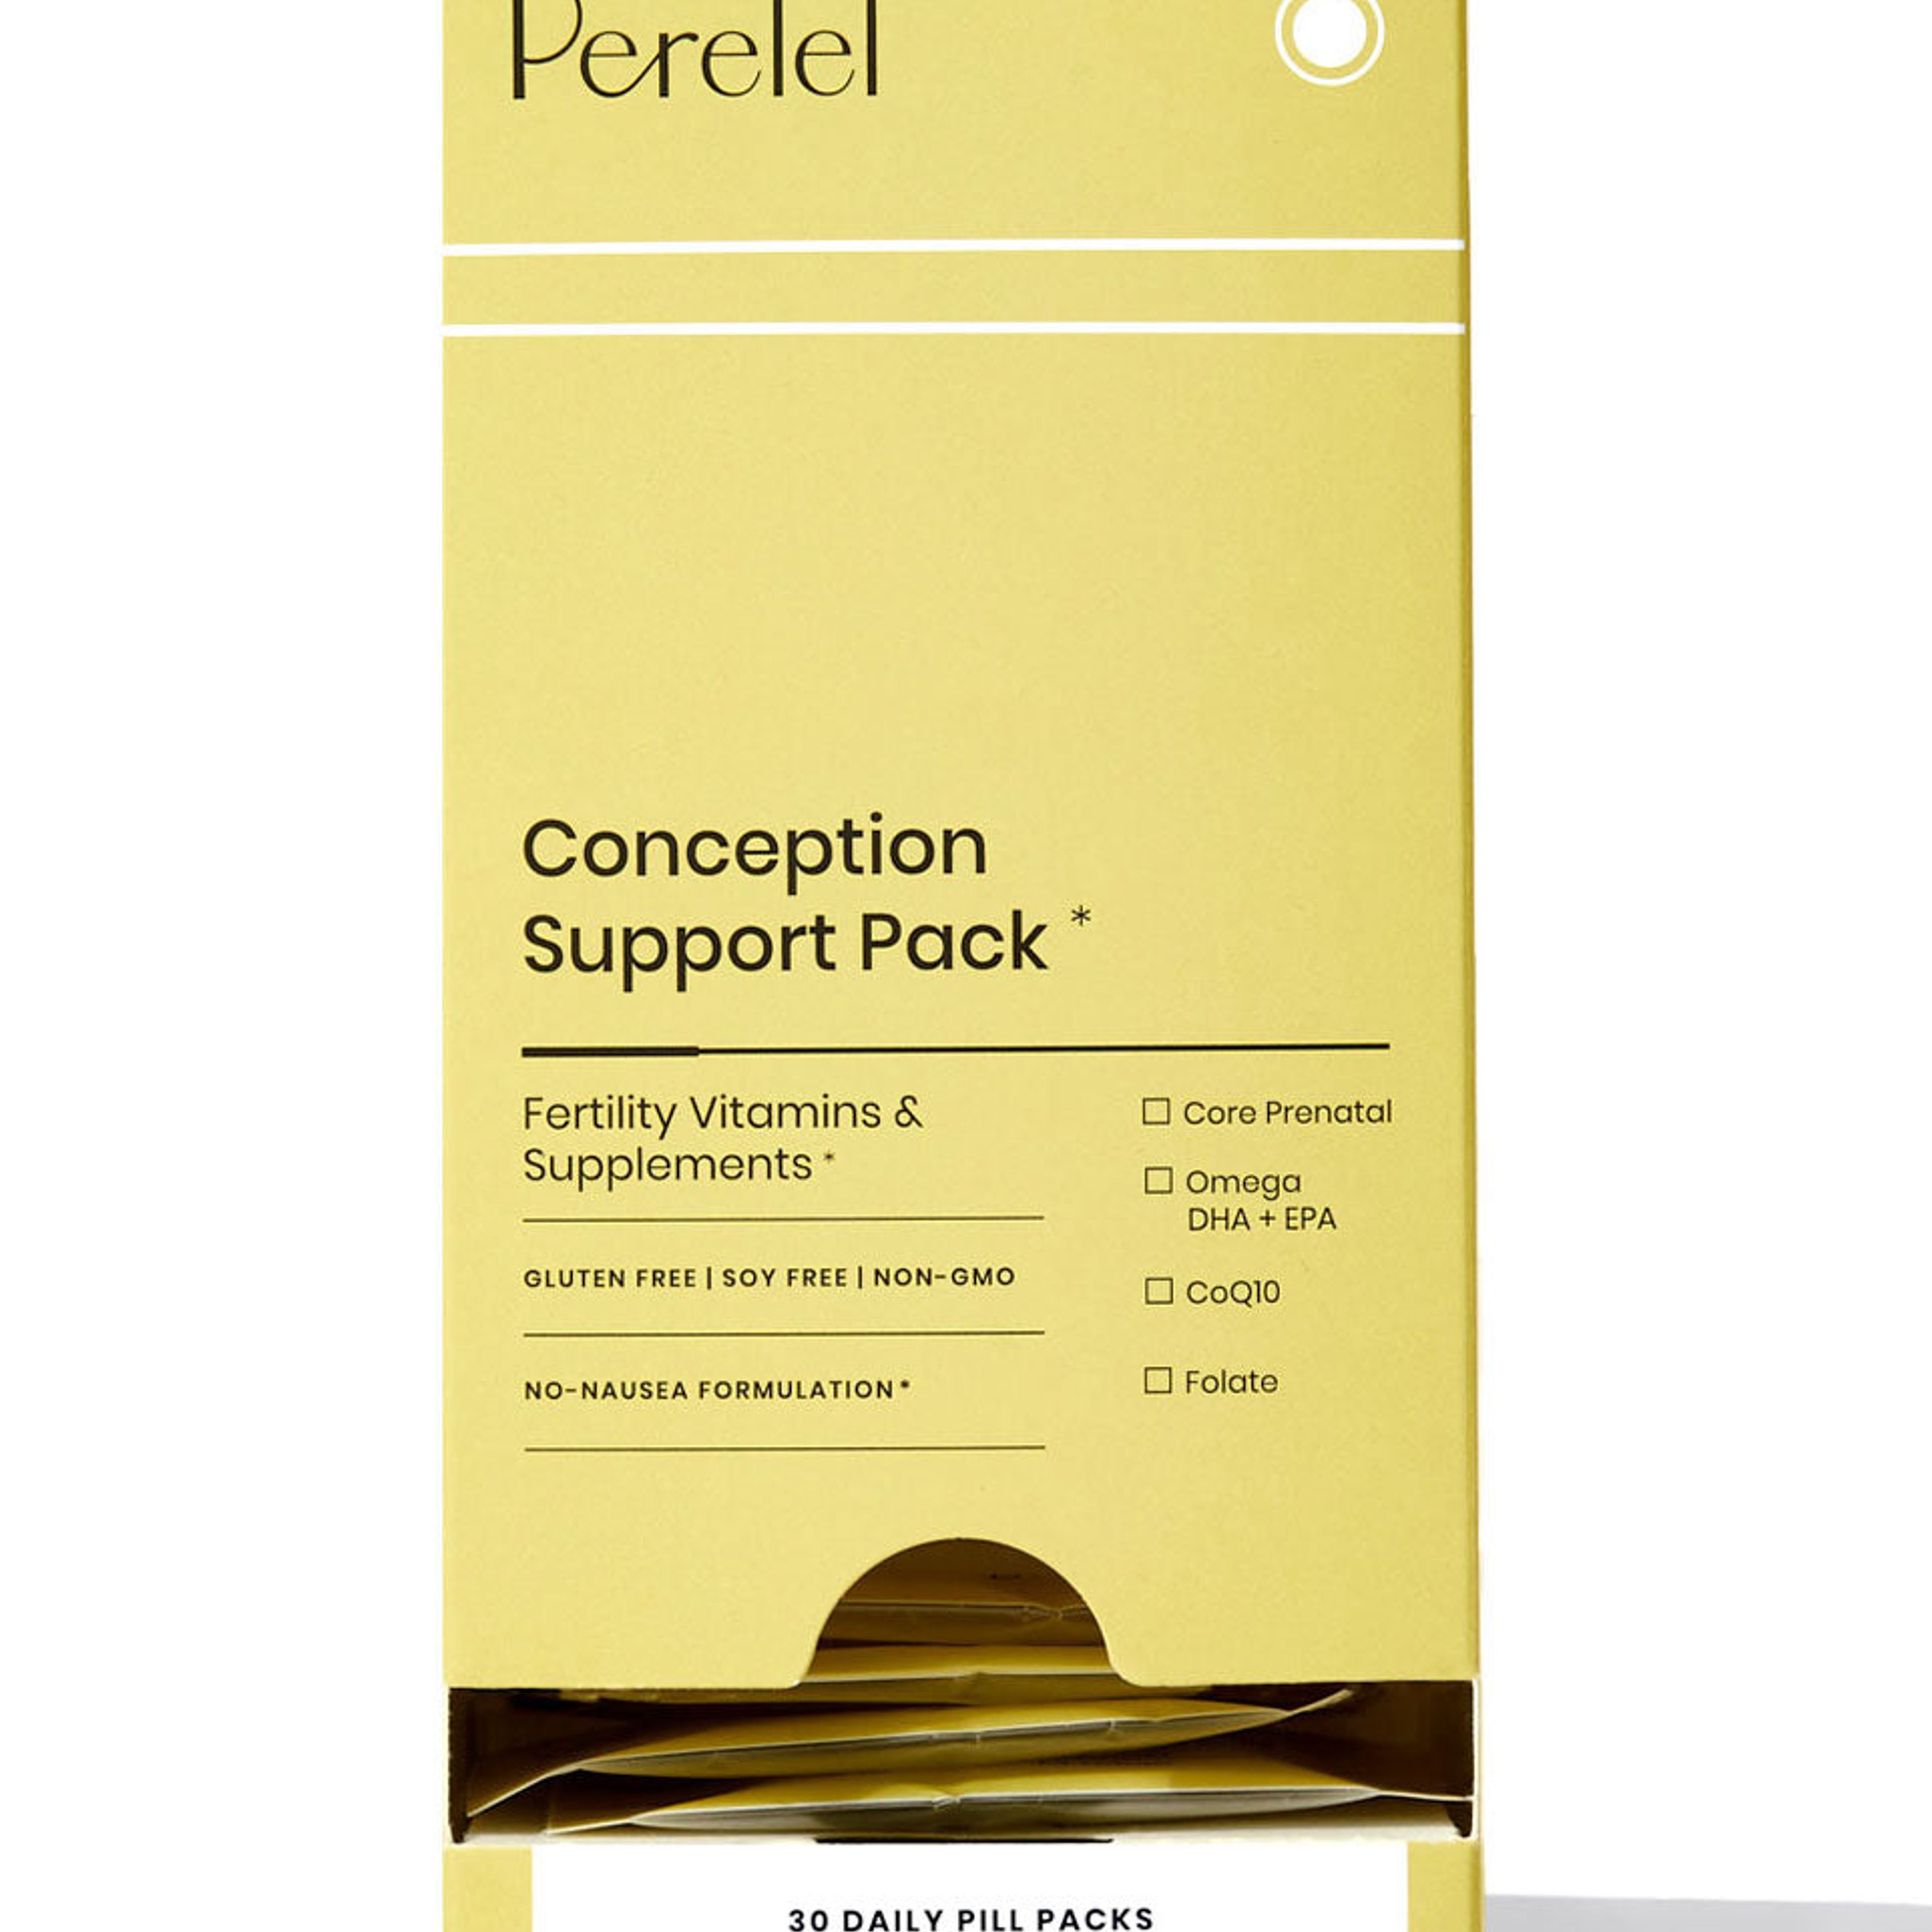 Conception Support Pack*